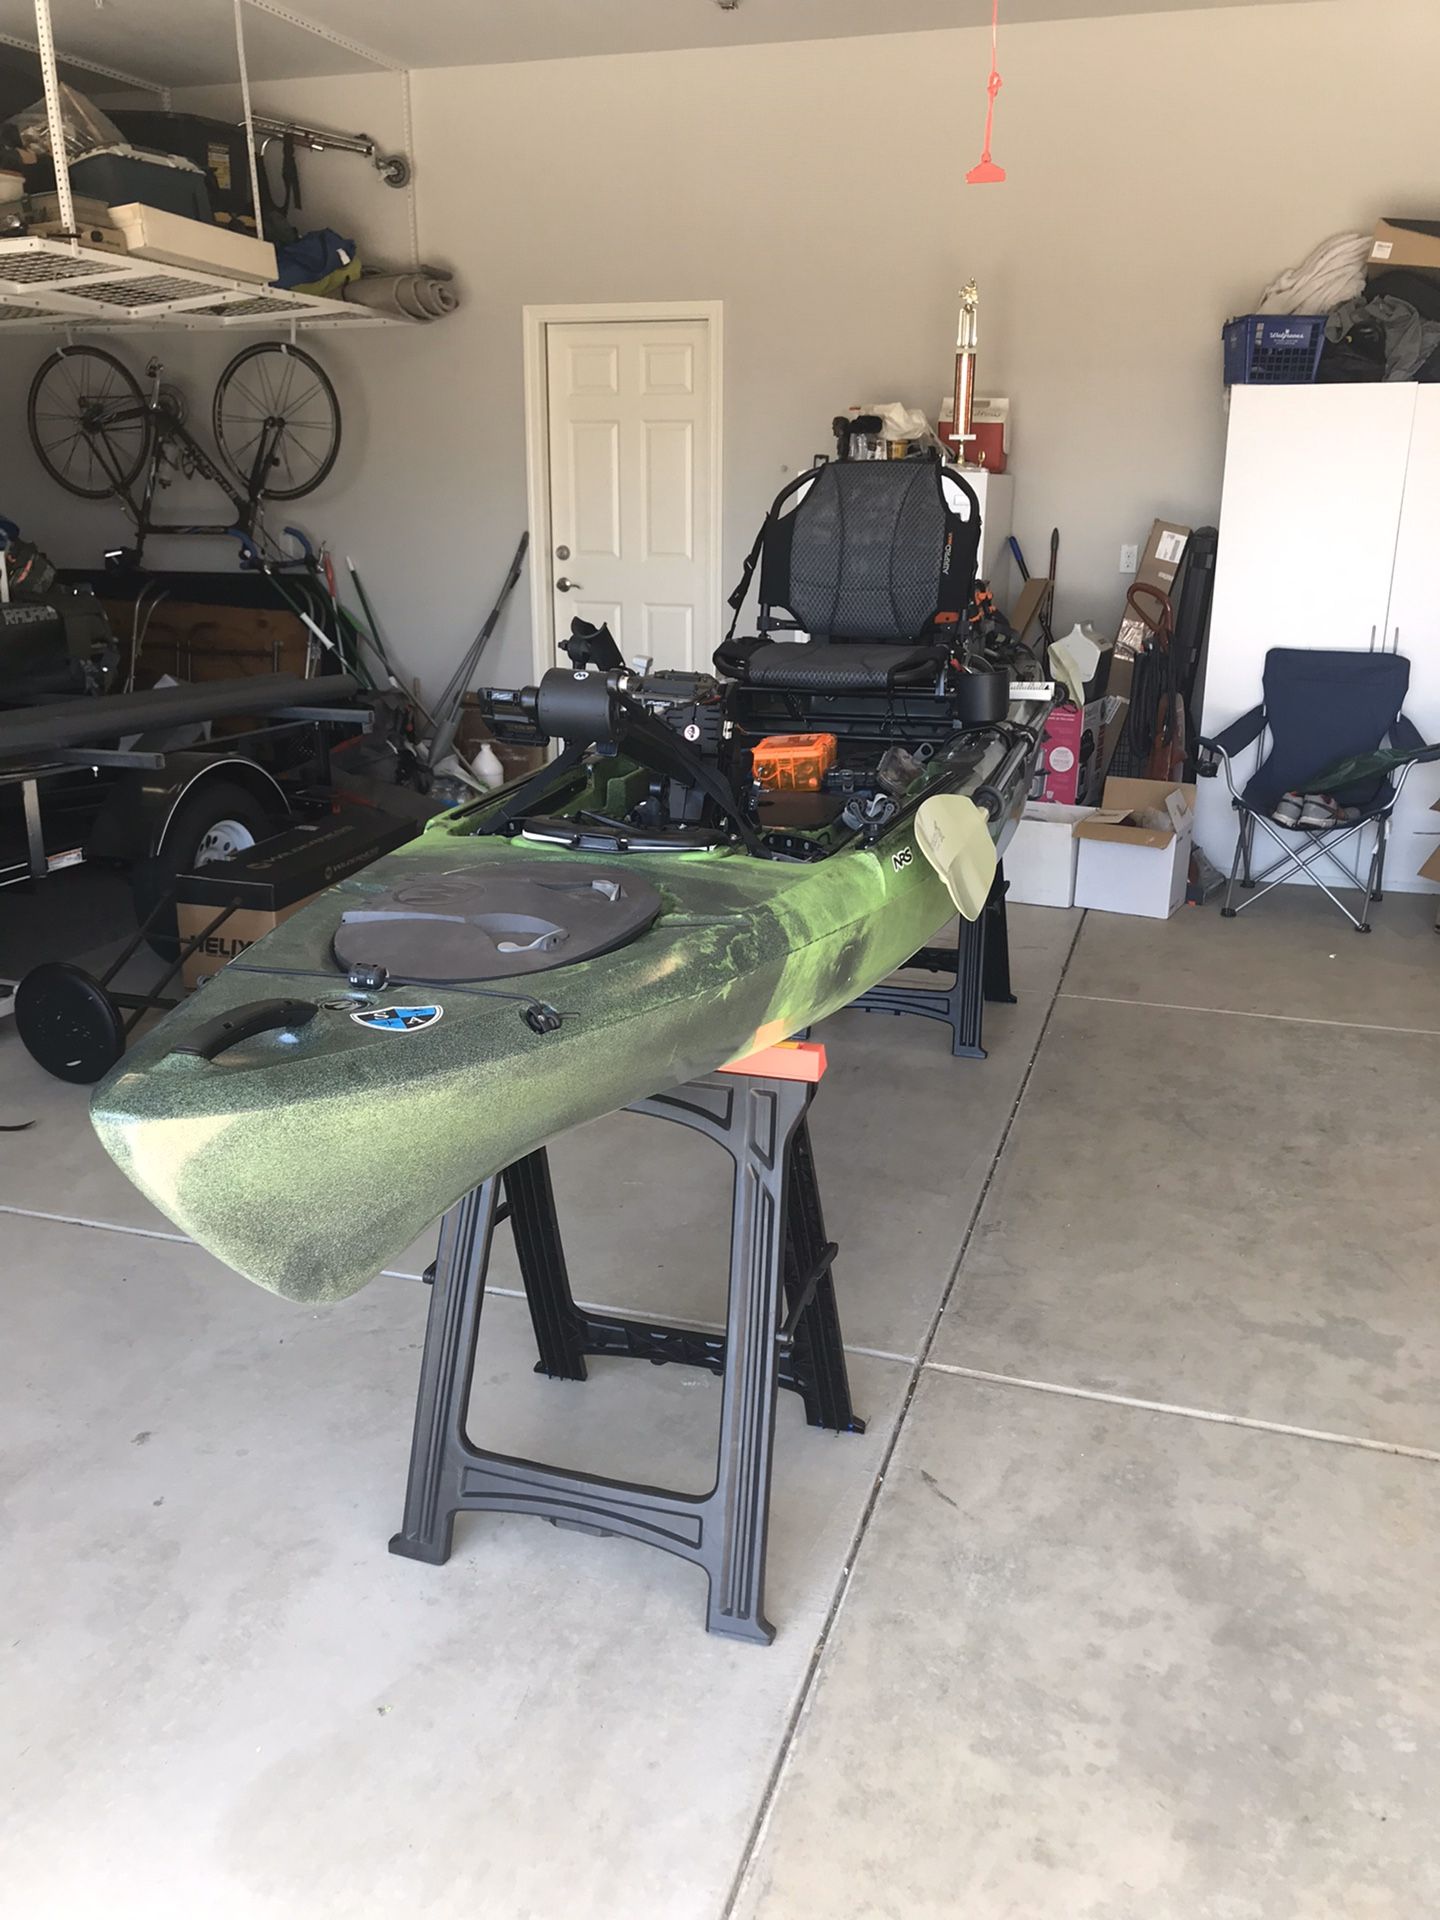 Two Wilderness systems kayaks + trailer